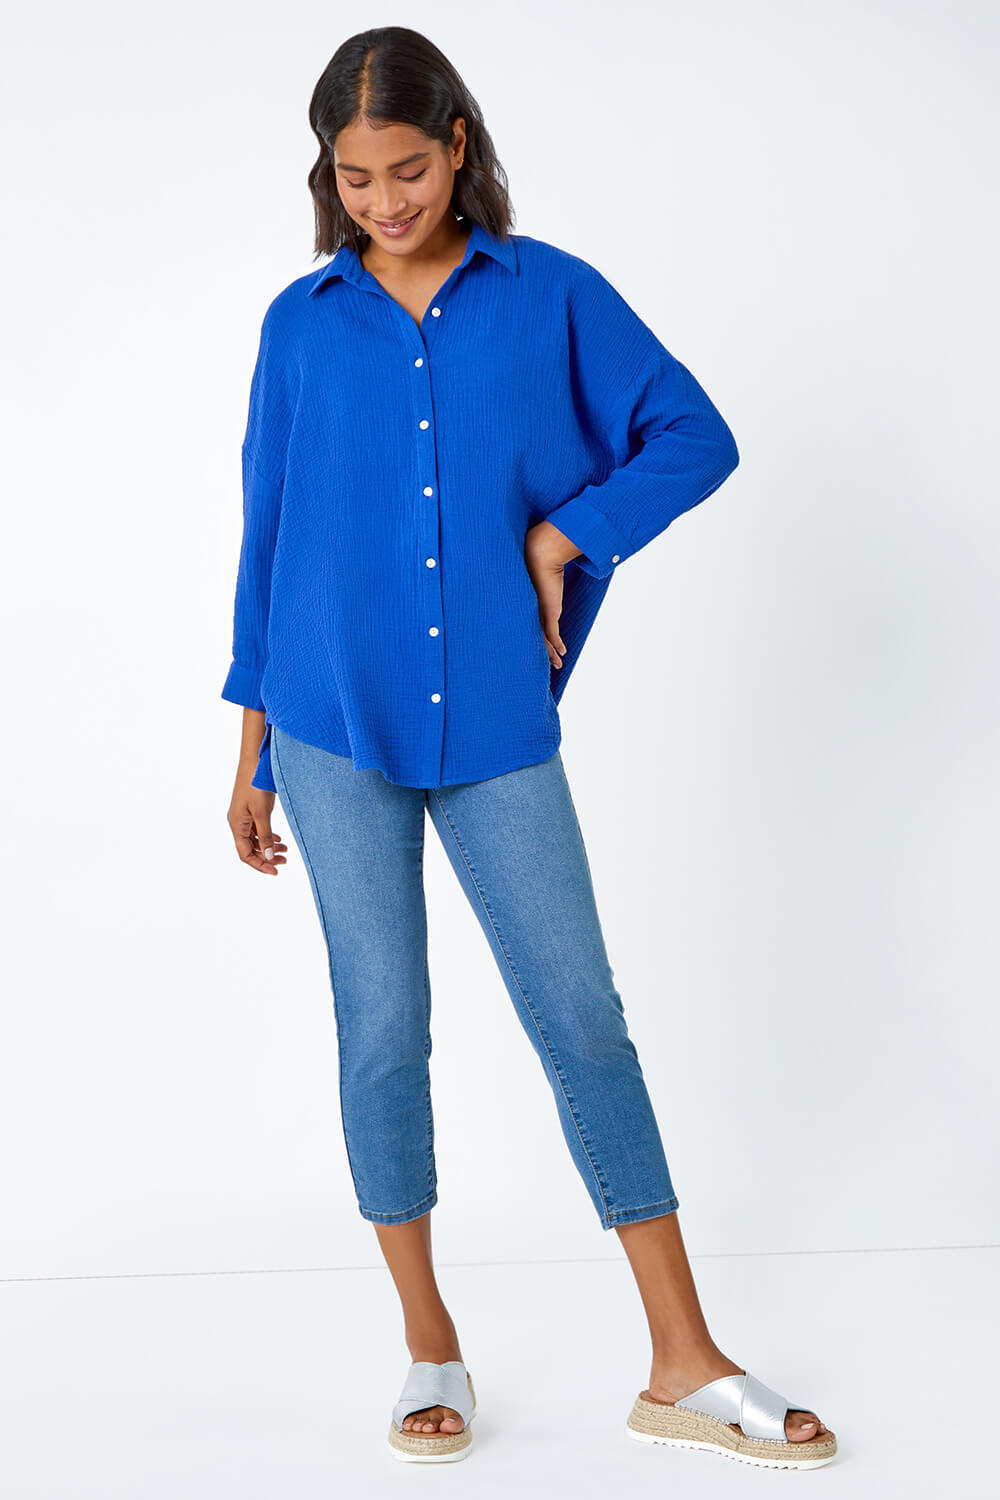 Royal Blue Cotton Textured Button Shirt, Image 2 of 5